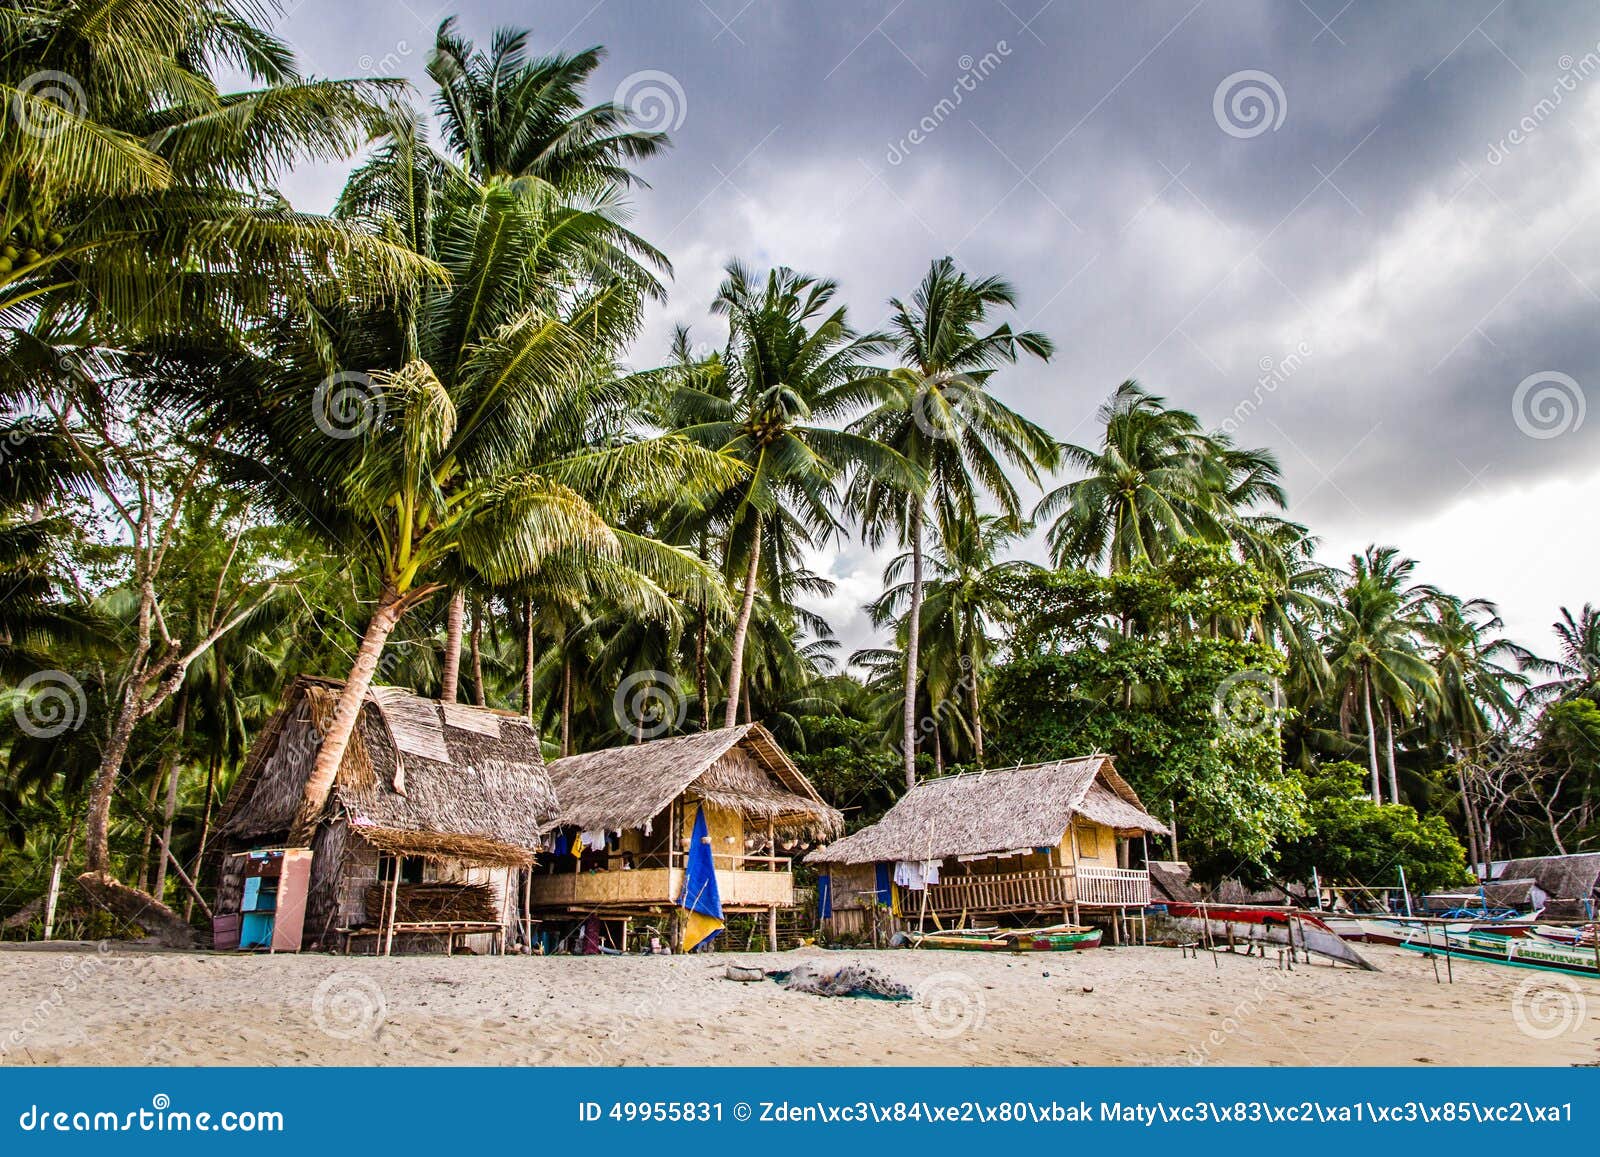 View of Beach,cottages and Palm Trees- Philippines Stock Image - Image ...